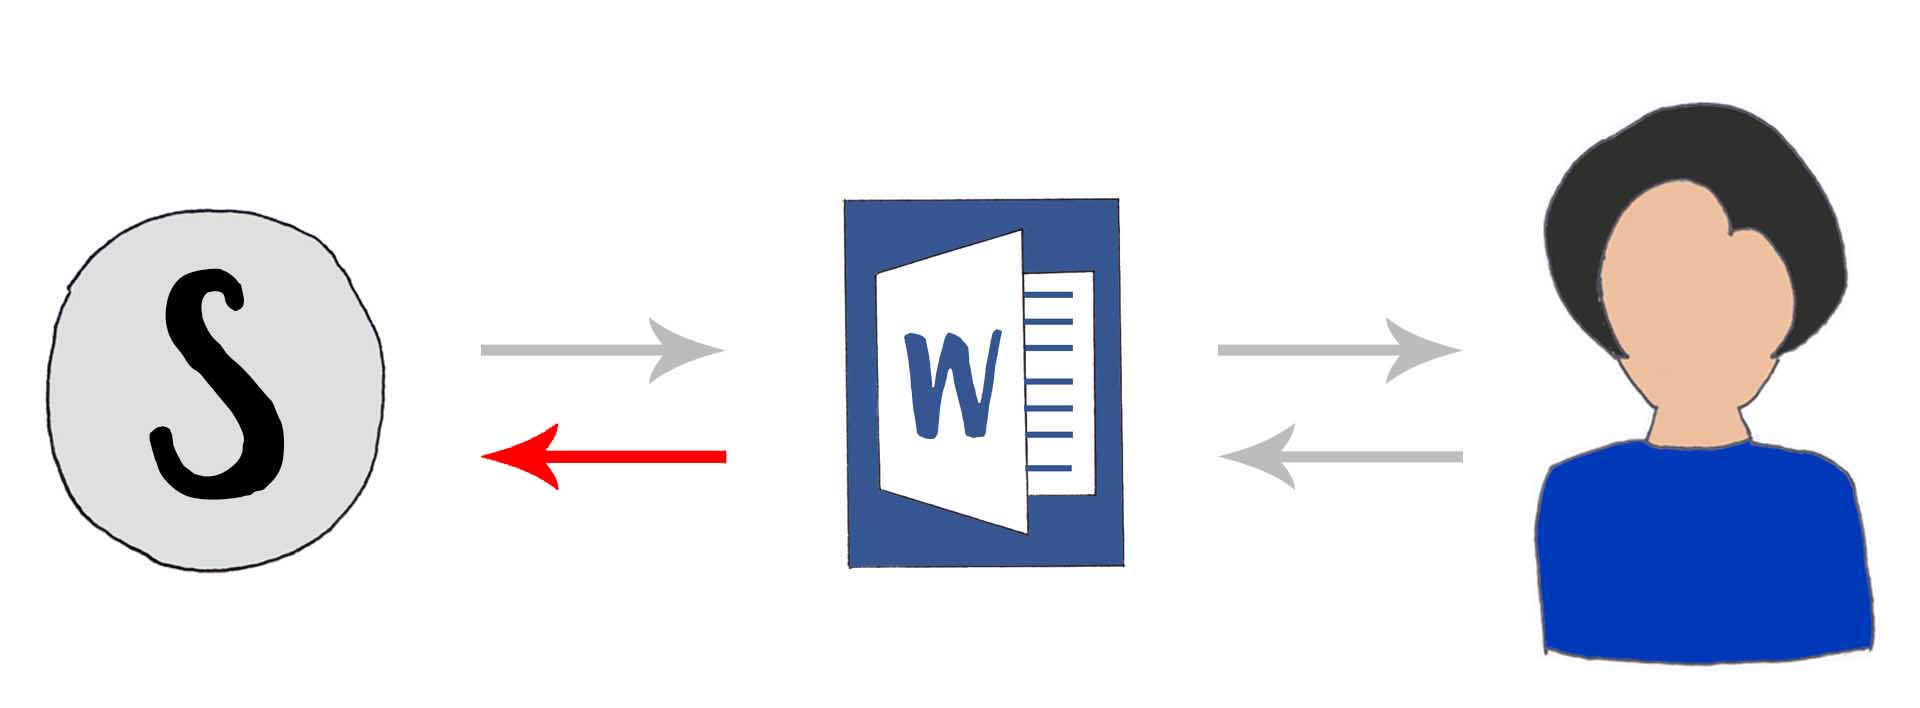 Workflow map showing a Scrivener document leading to an advisor and back